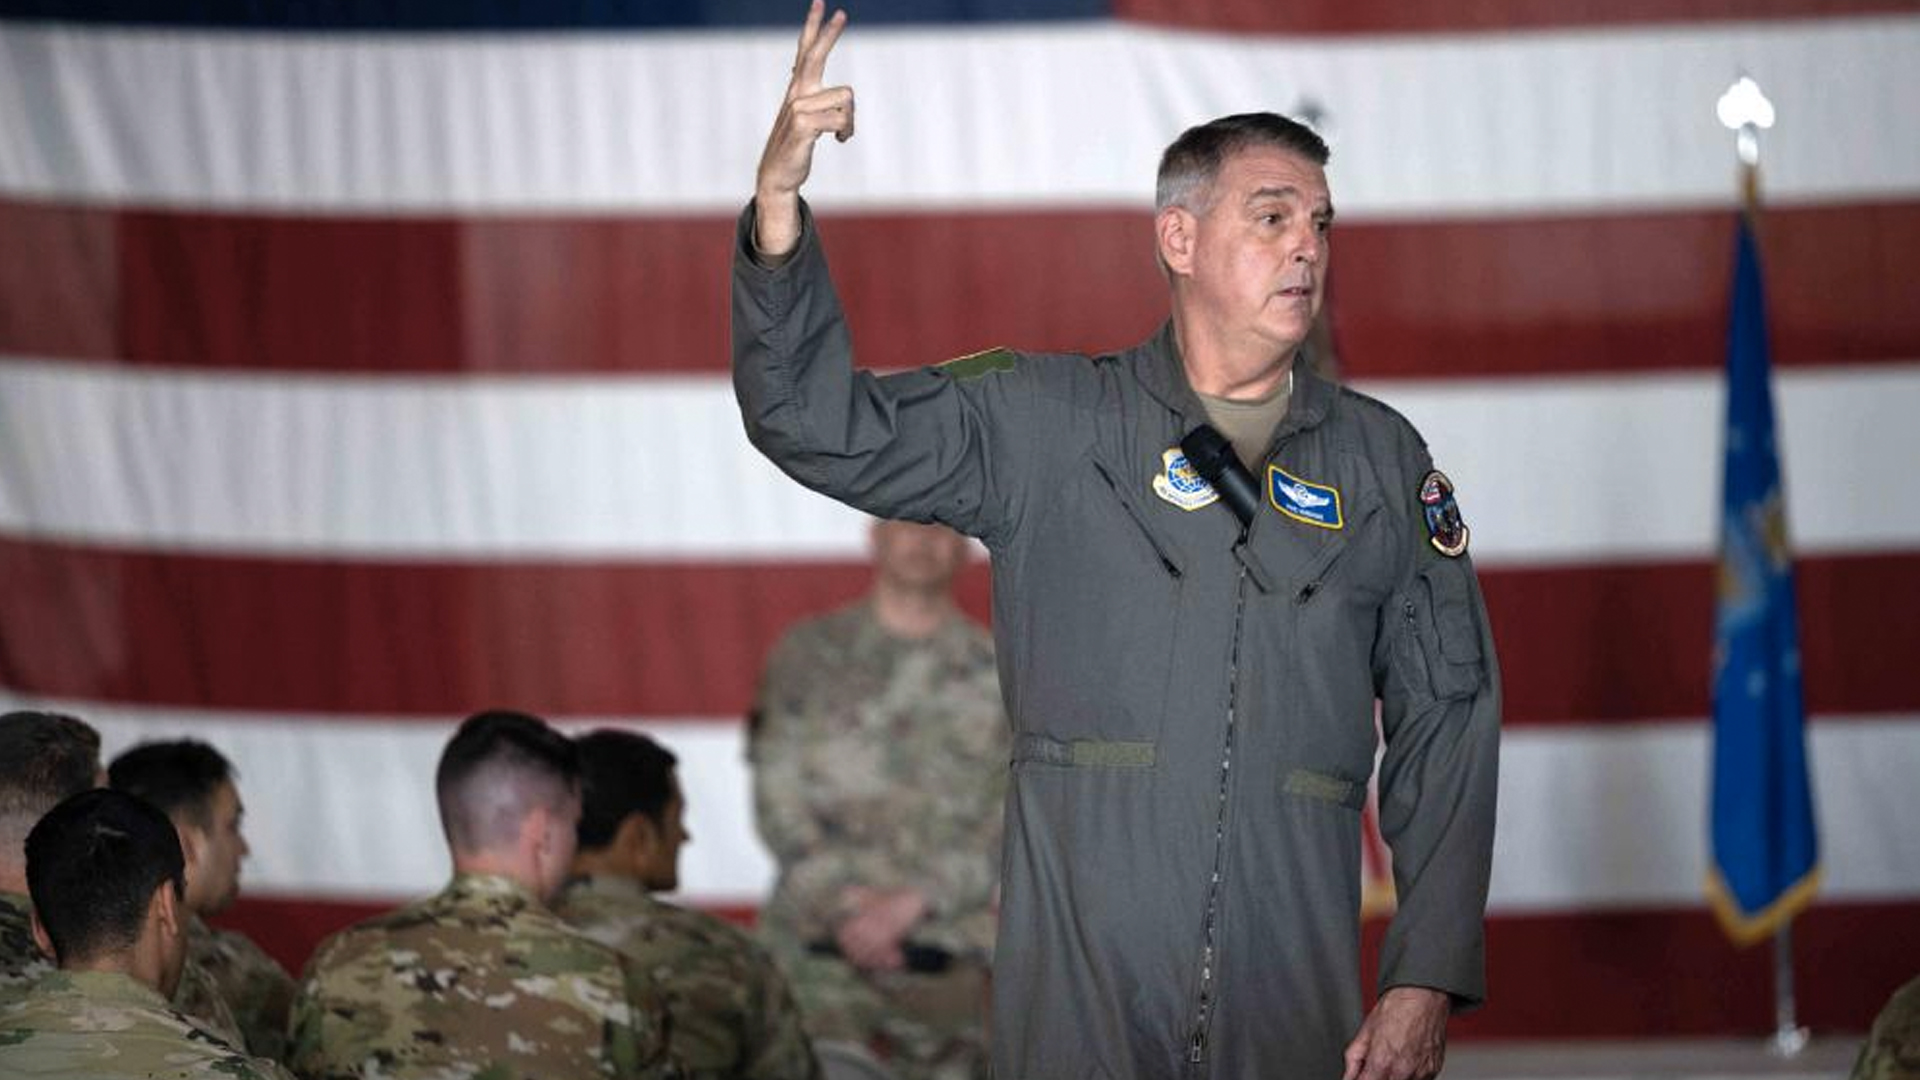 Untethered' Air Force general: Killing the enemy makes life better